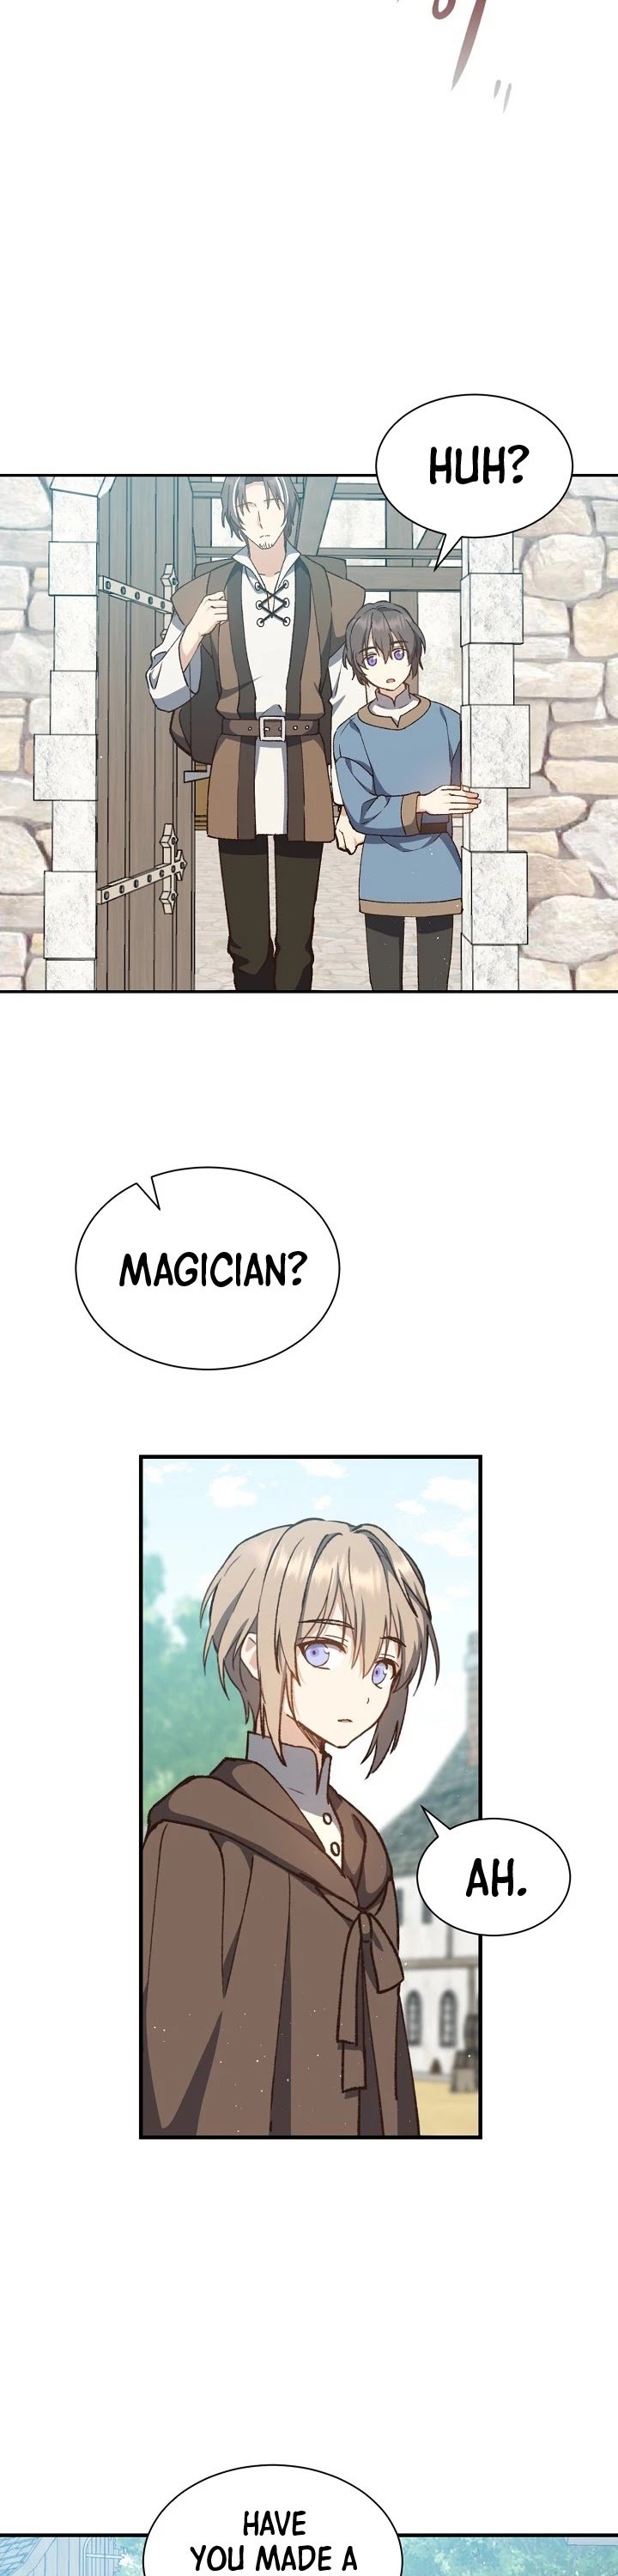 Return of the 8th class Magician chapter 9